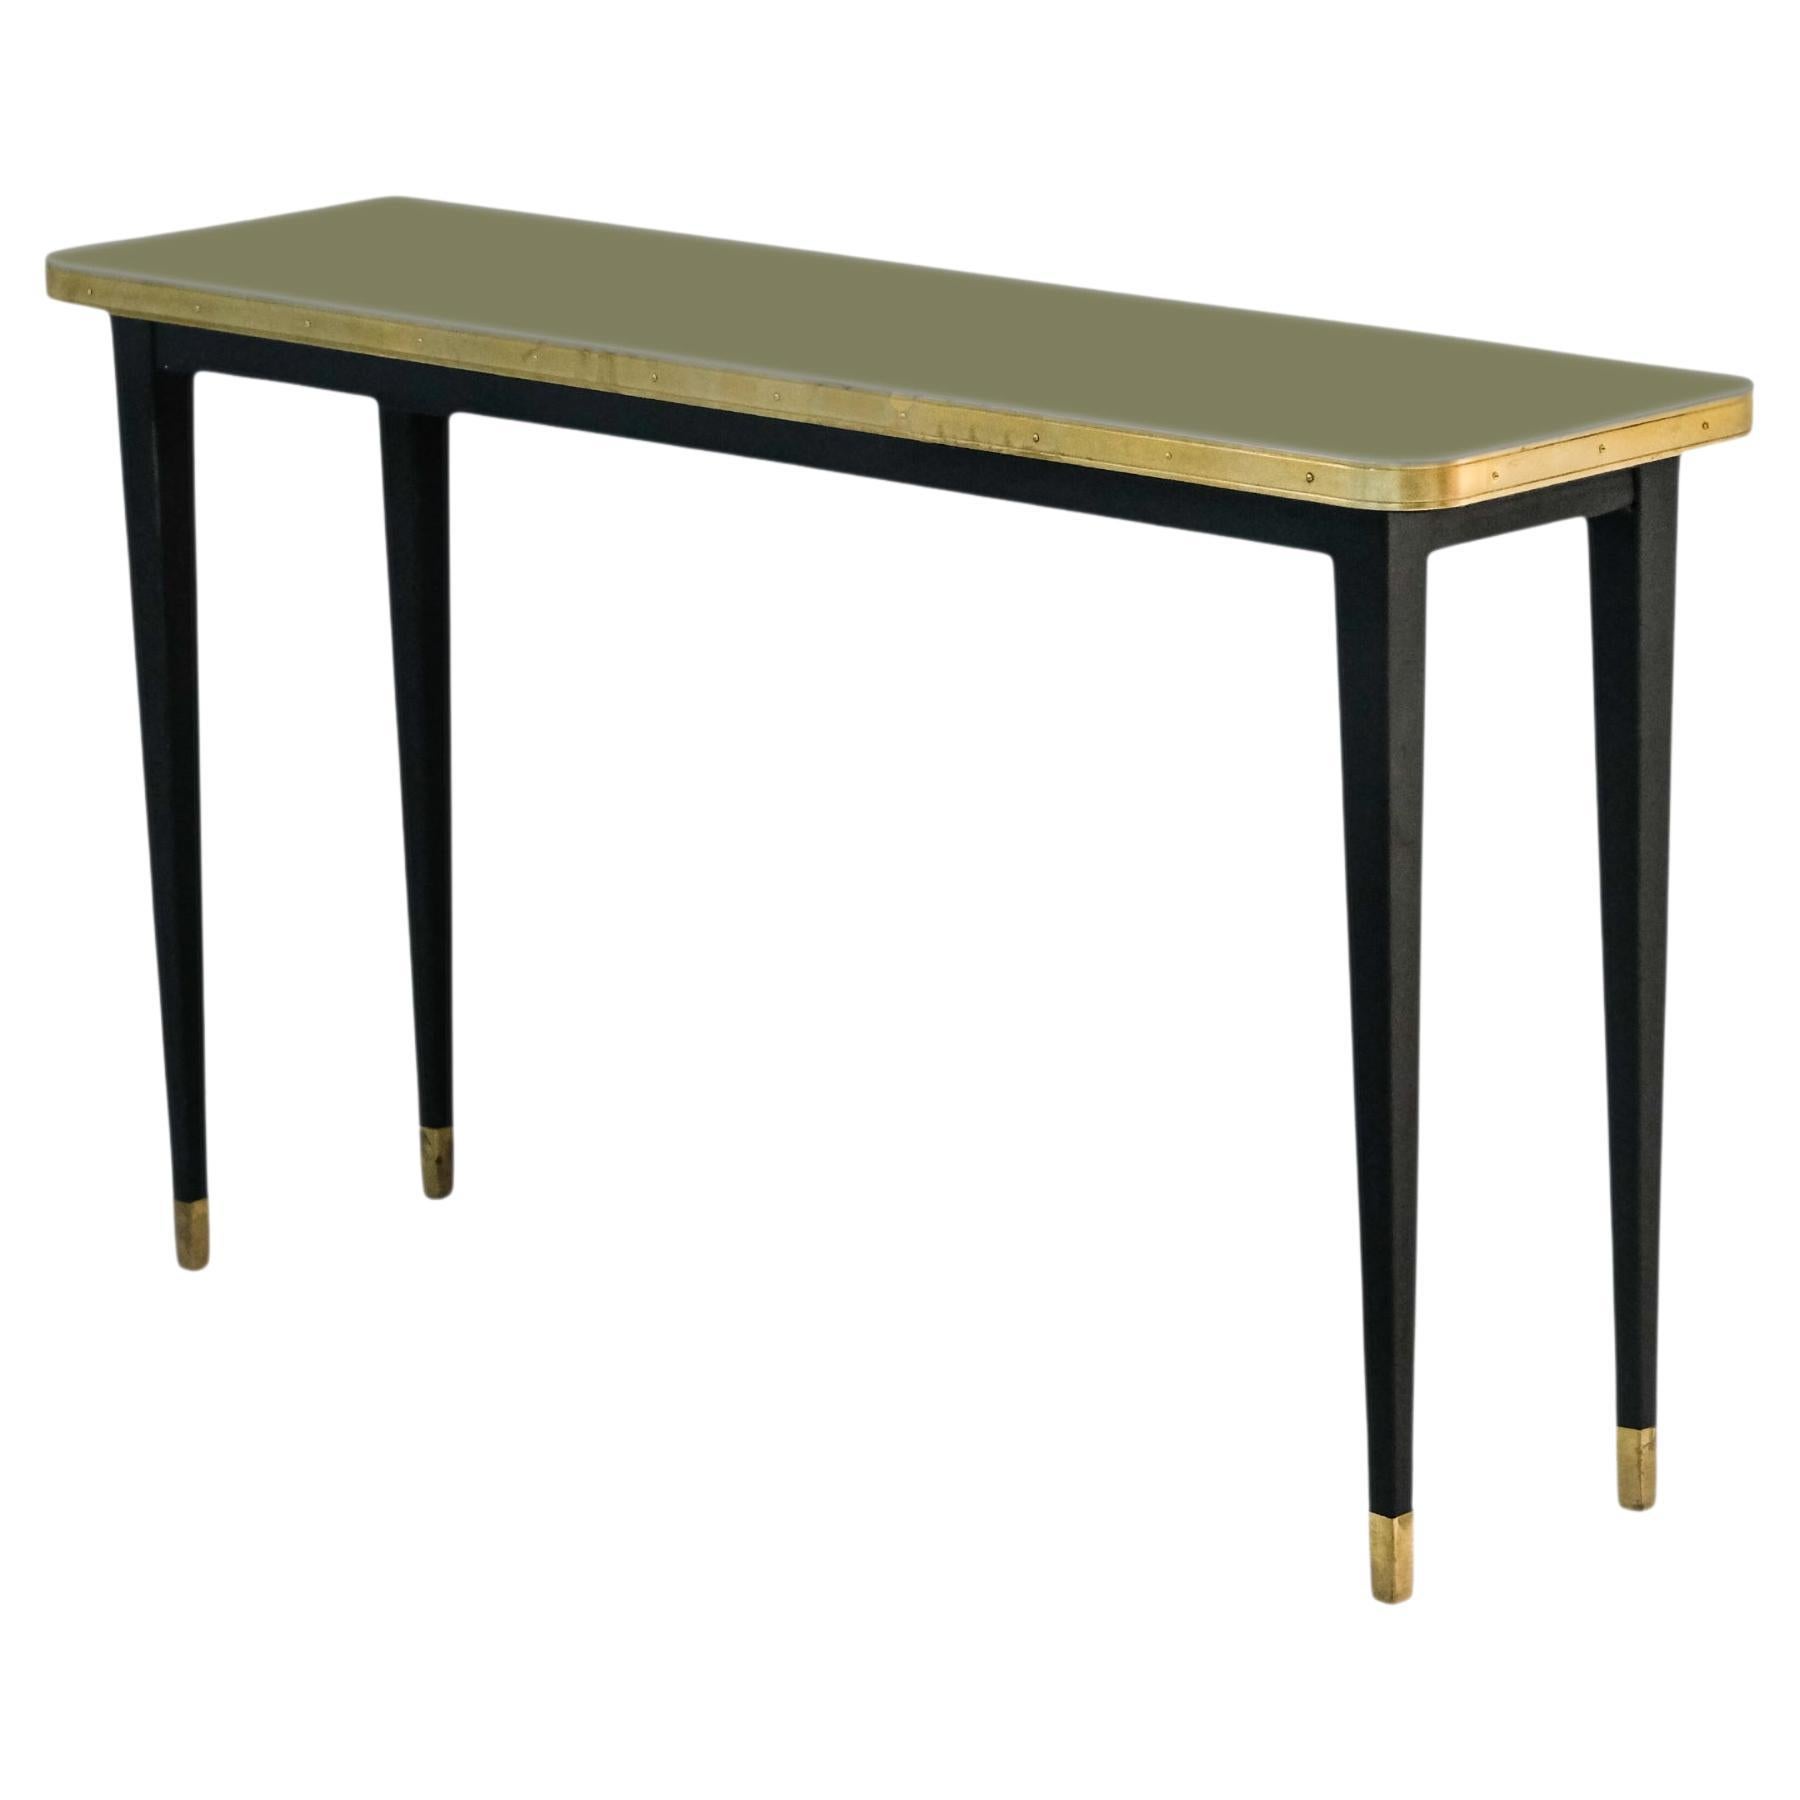 Mid-Century Modern Console Table, High Gloss Laminate & Brass Details, Burgundy - L For Sale